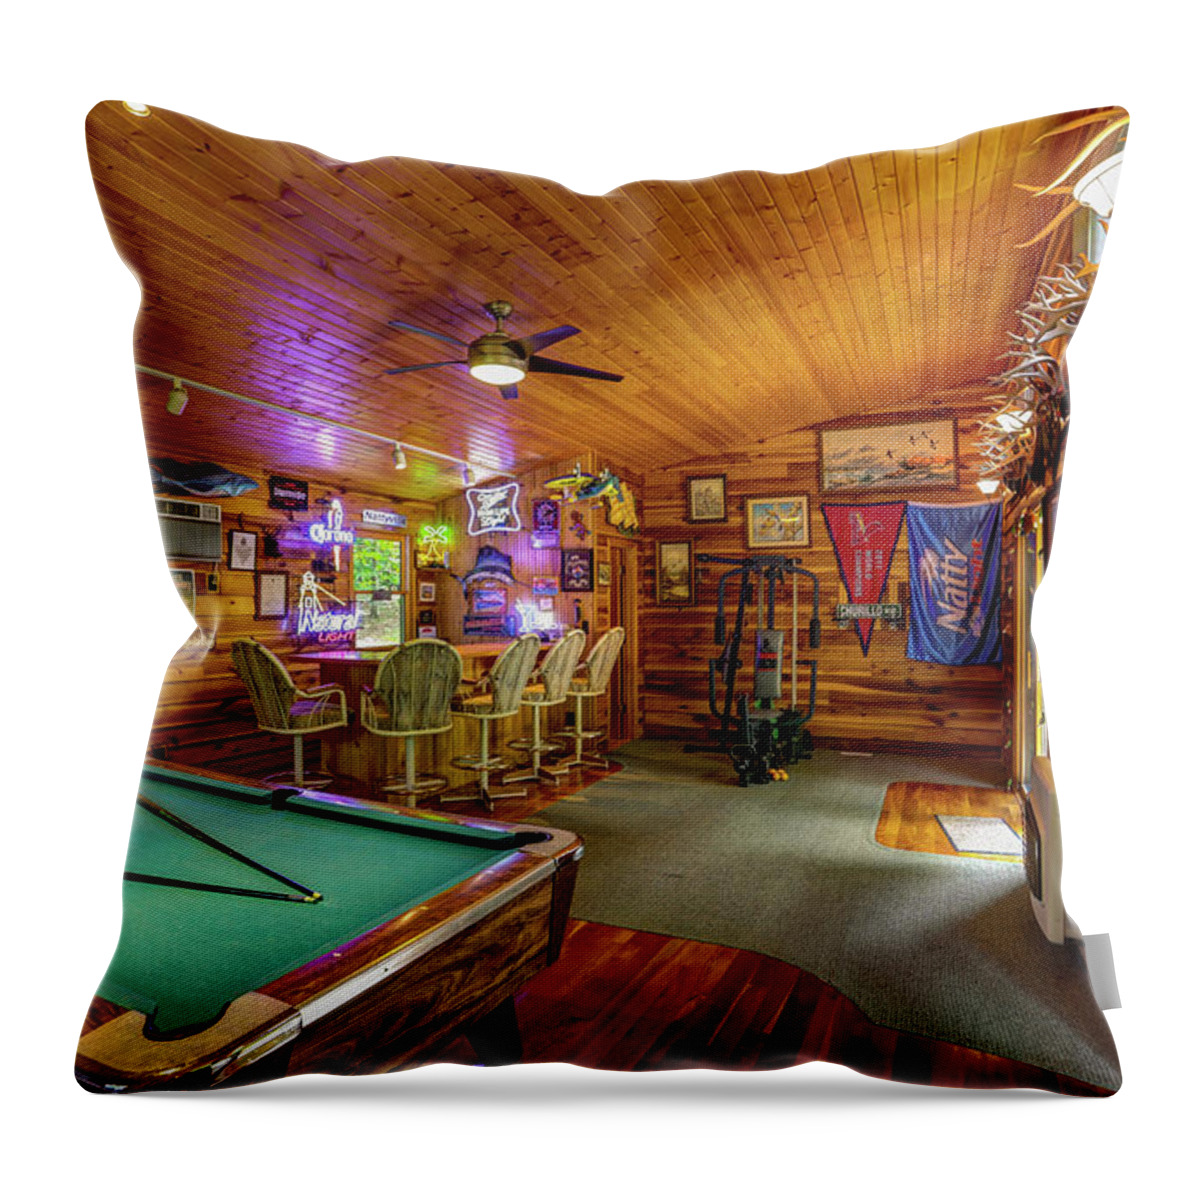 Real Estate Photography Throw Pillow featuring the photograph Burns Rd Game Room by Jeff Kurtz